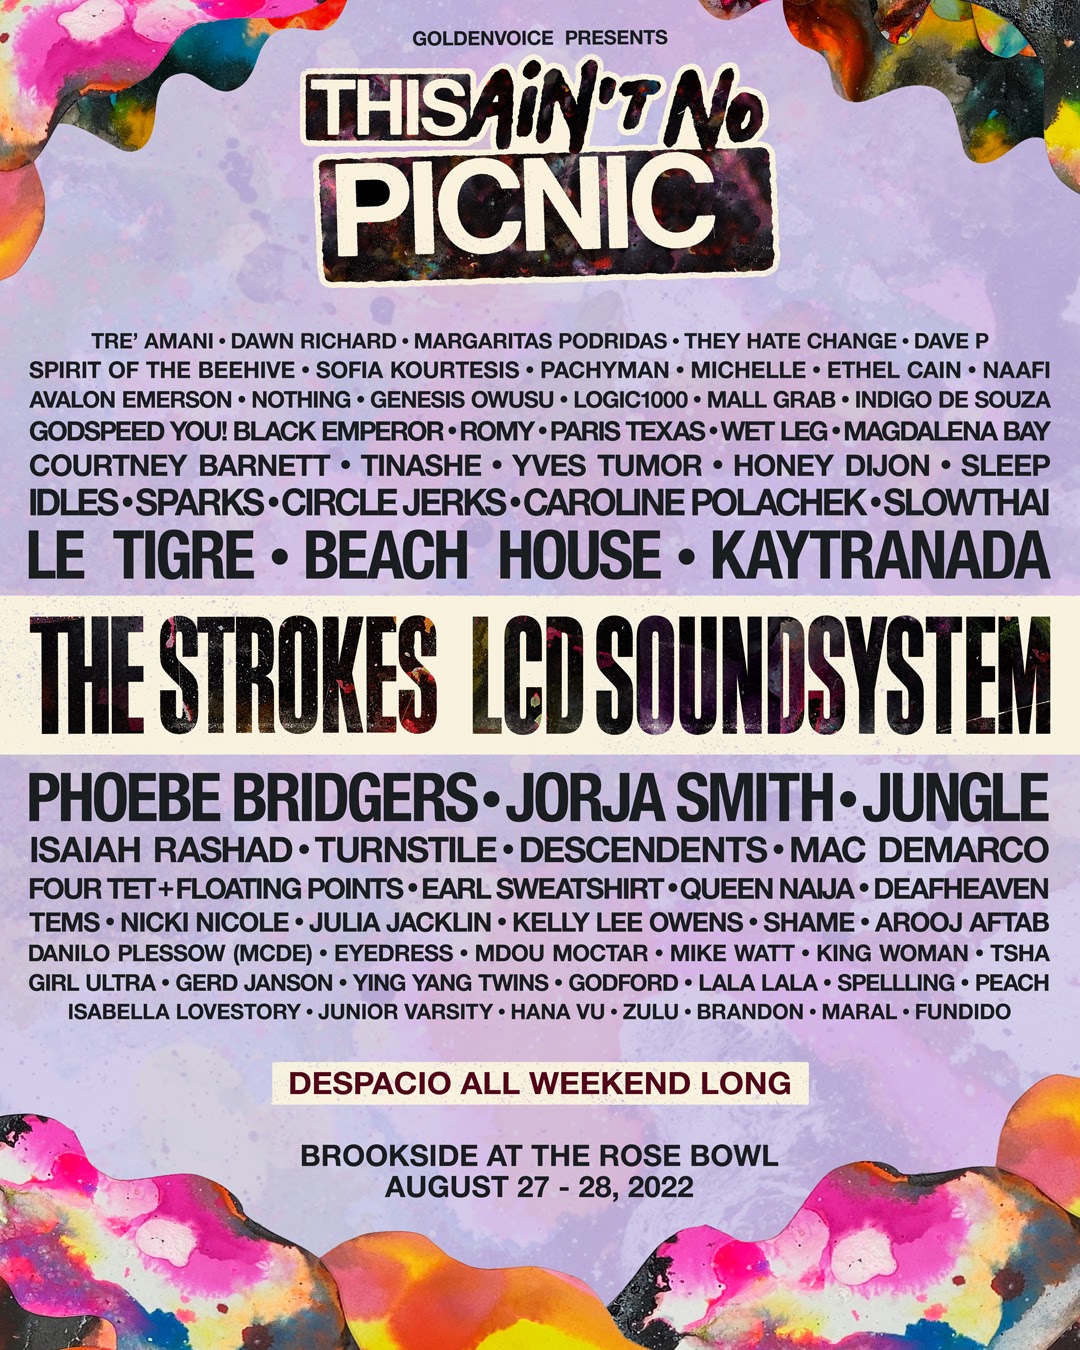 This 2022 Picnic Festival lineup poster